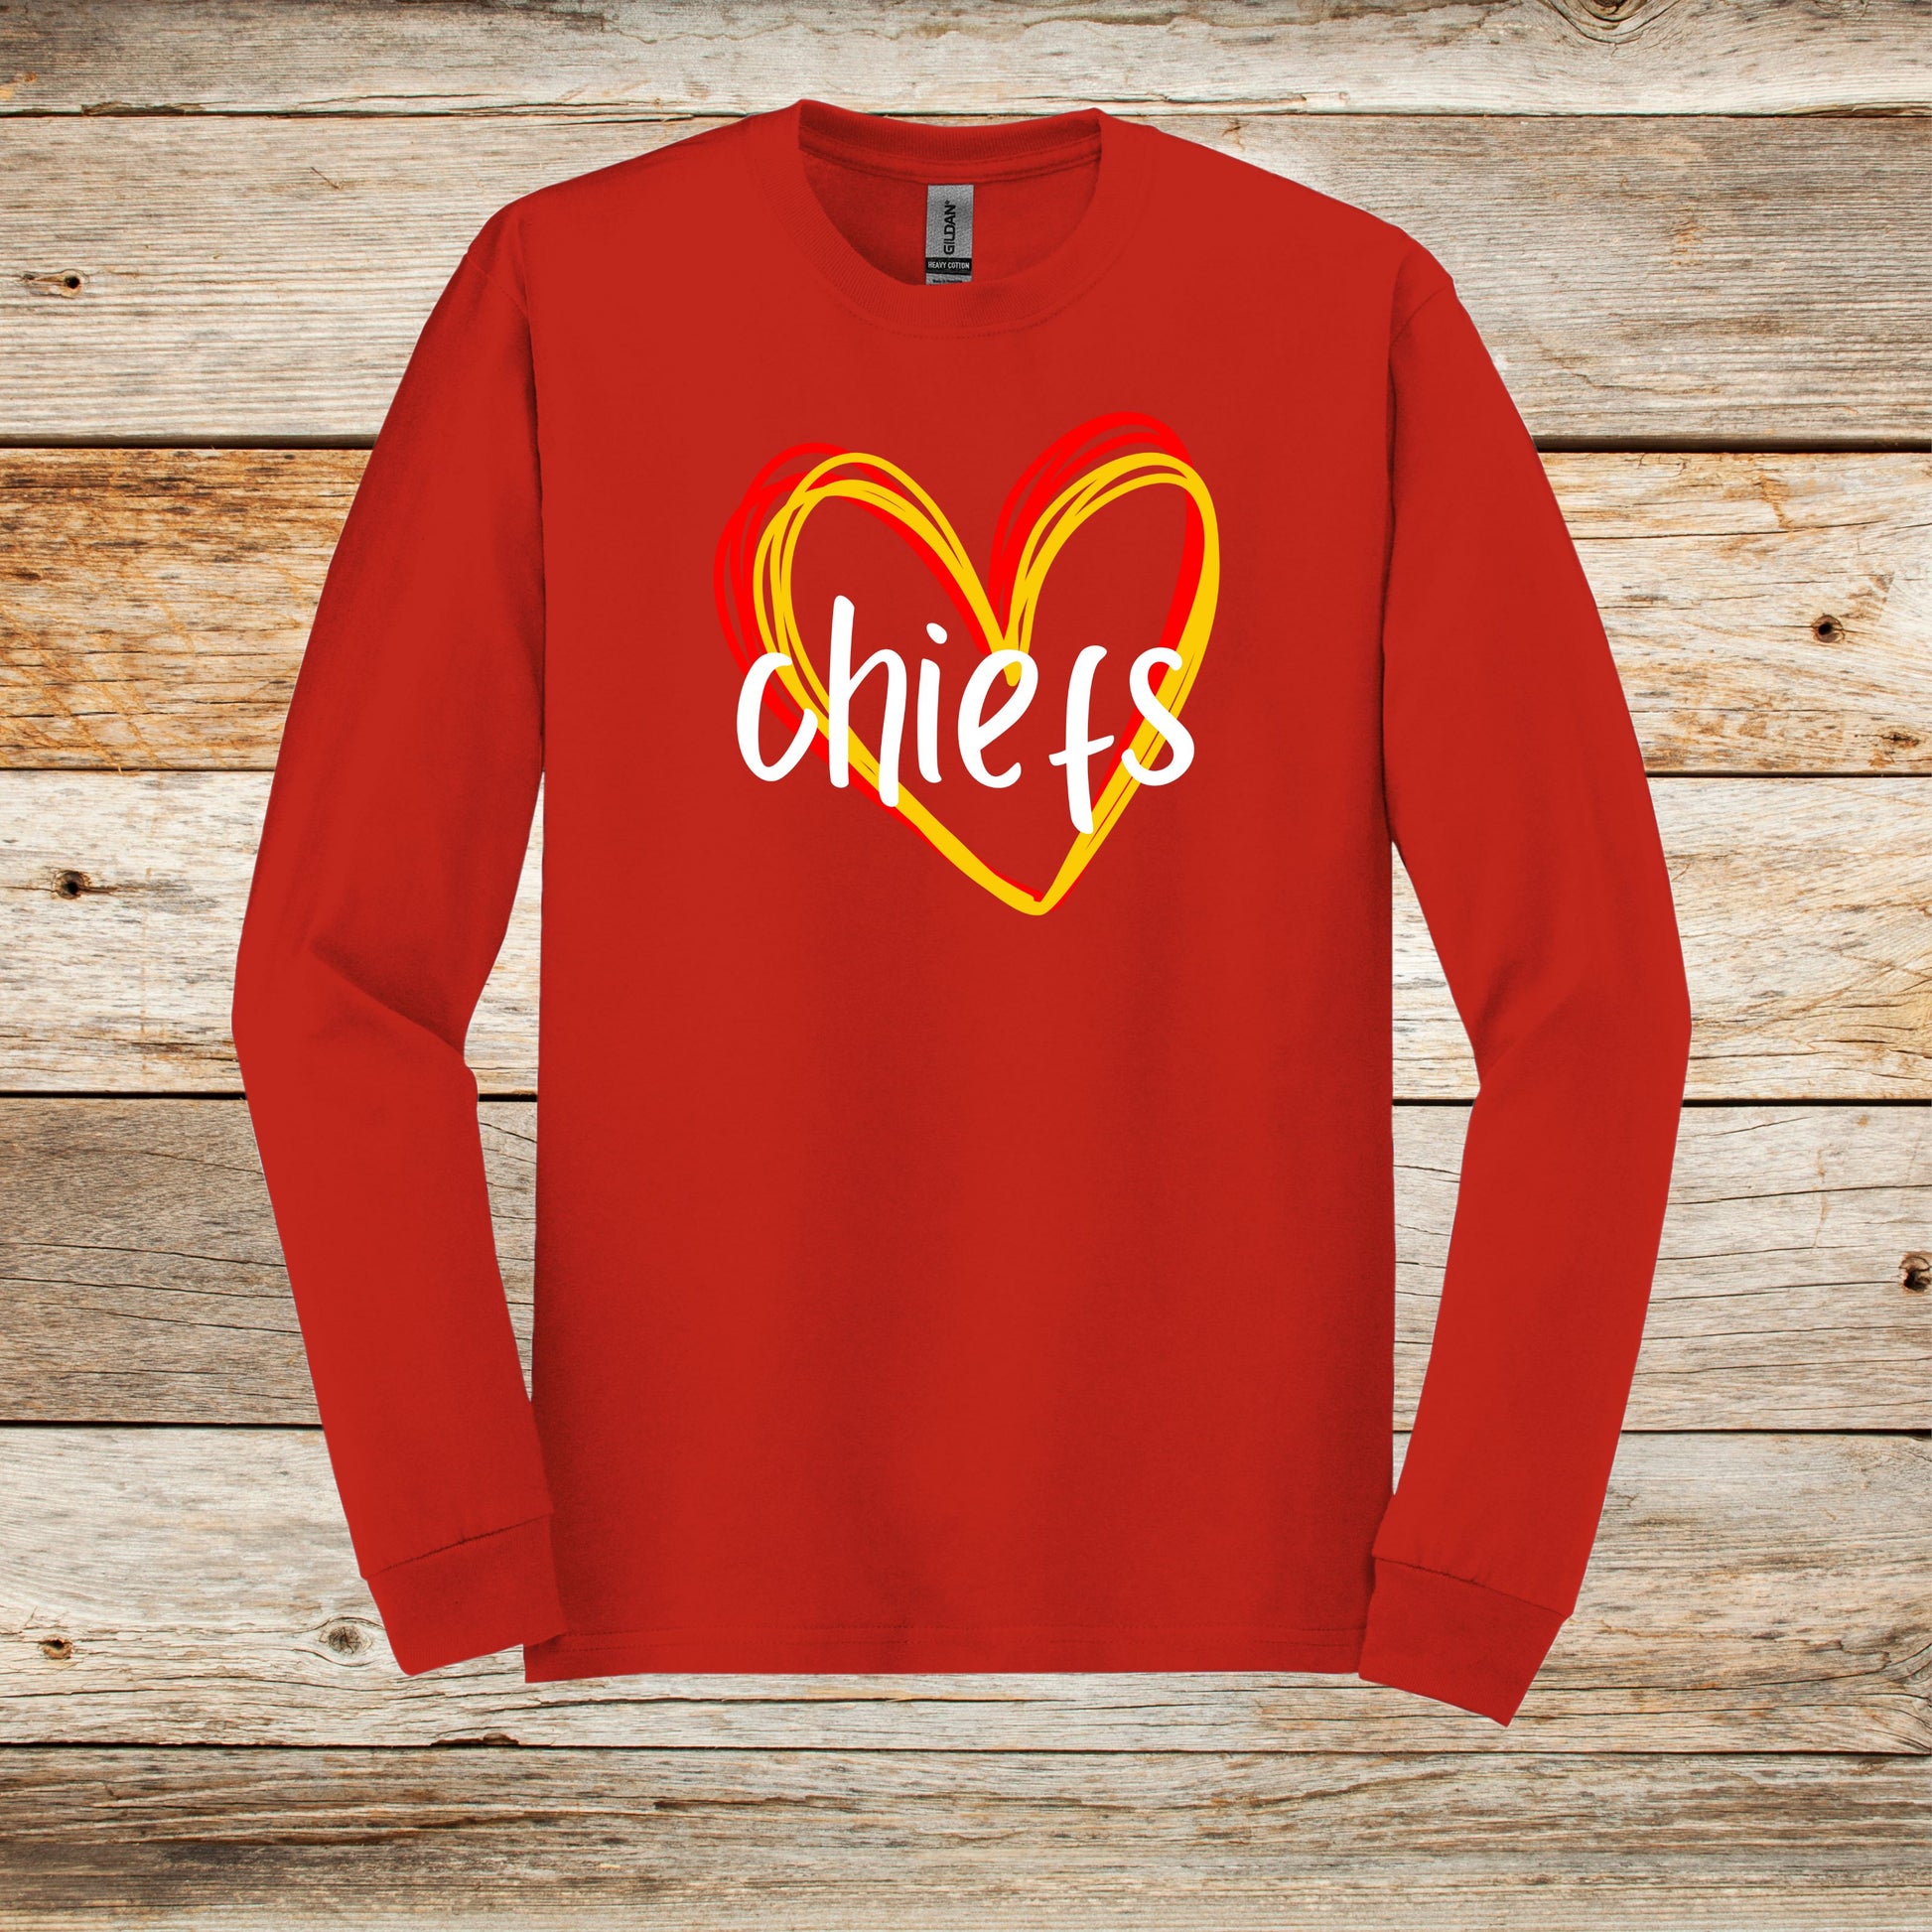 Football Long Sleeve T-Shirt - Chiefs Football - Adult and Children's Tee Shirts - Sports Long Sleeve T-Shirts Graphic Avenue Red Adult Small 